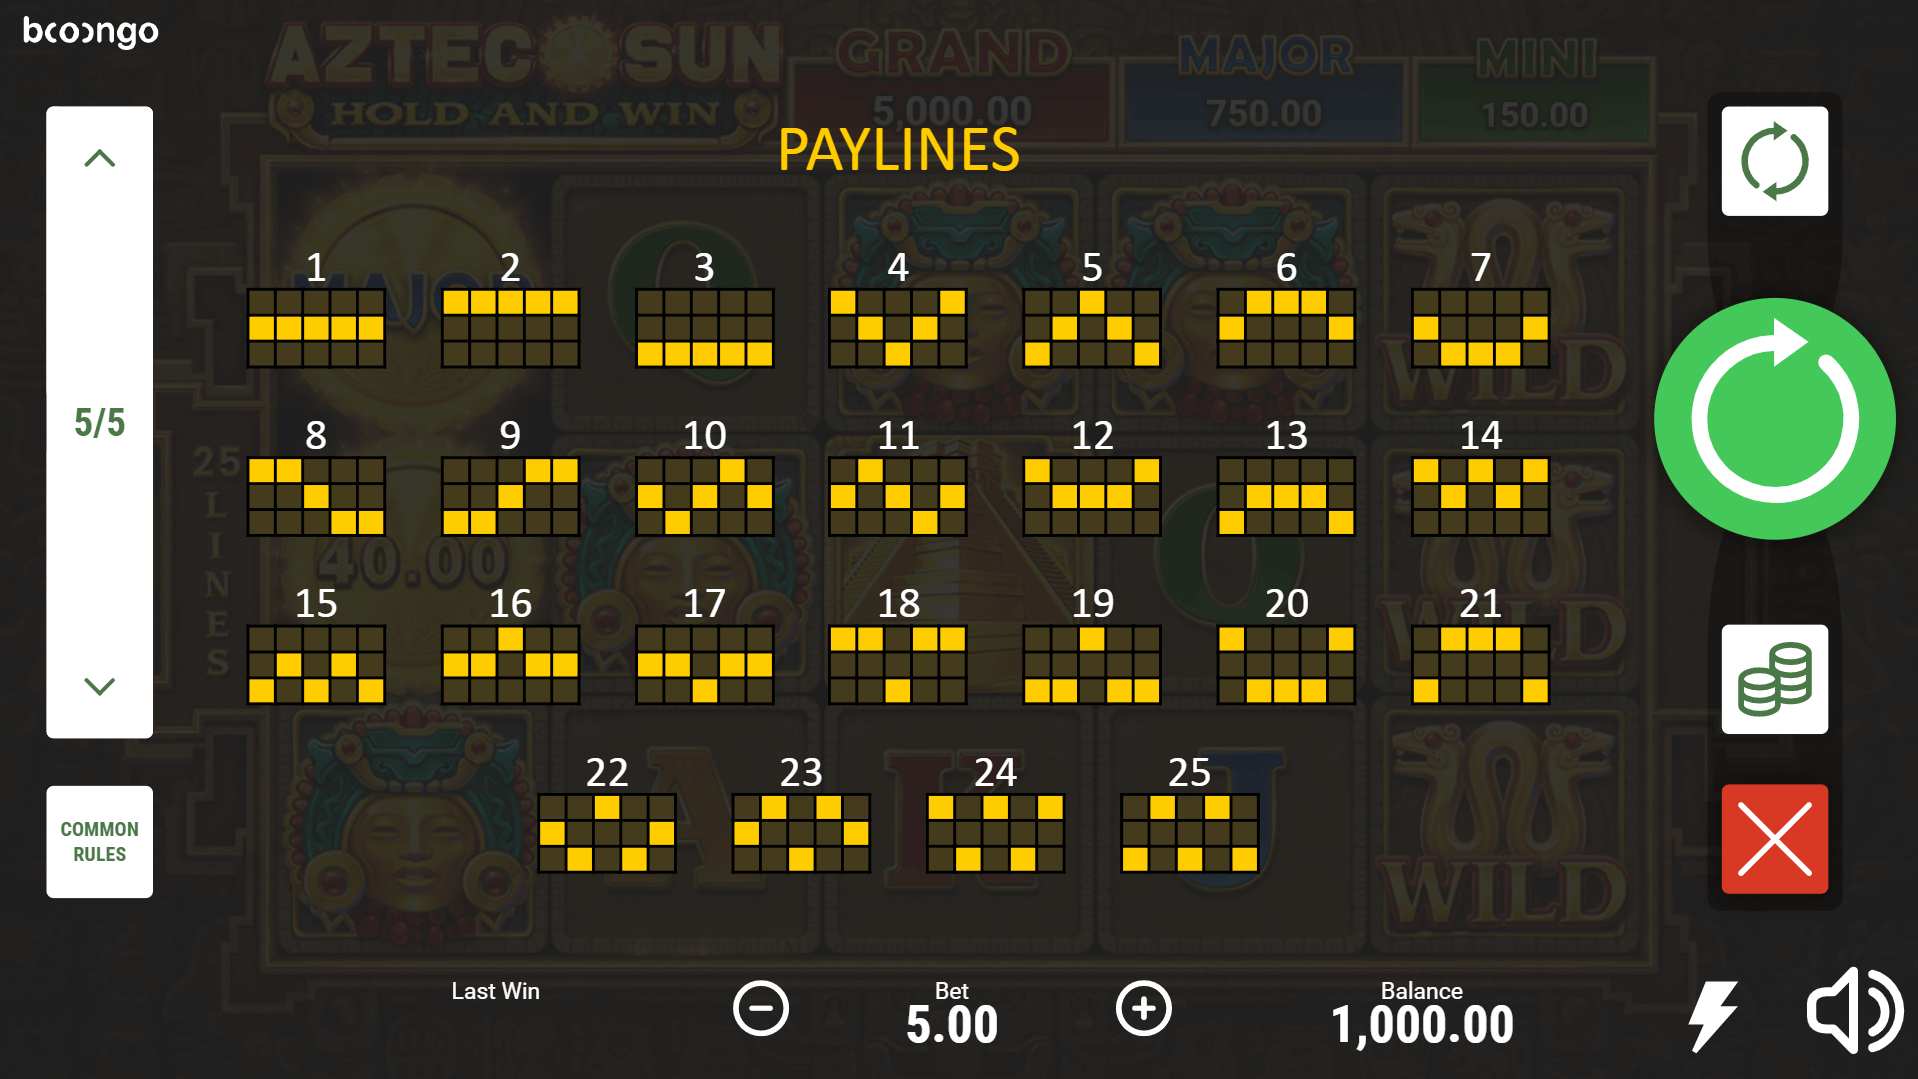 aztec sun hold and win slot machine detail image 4